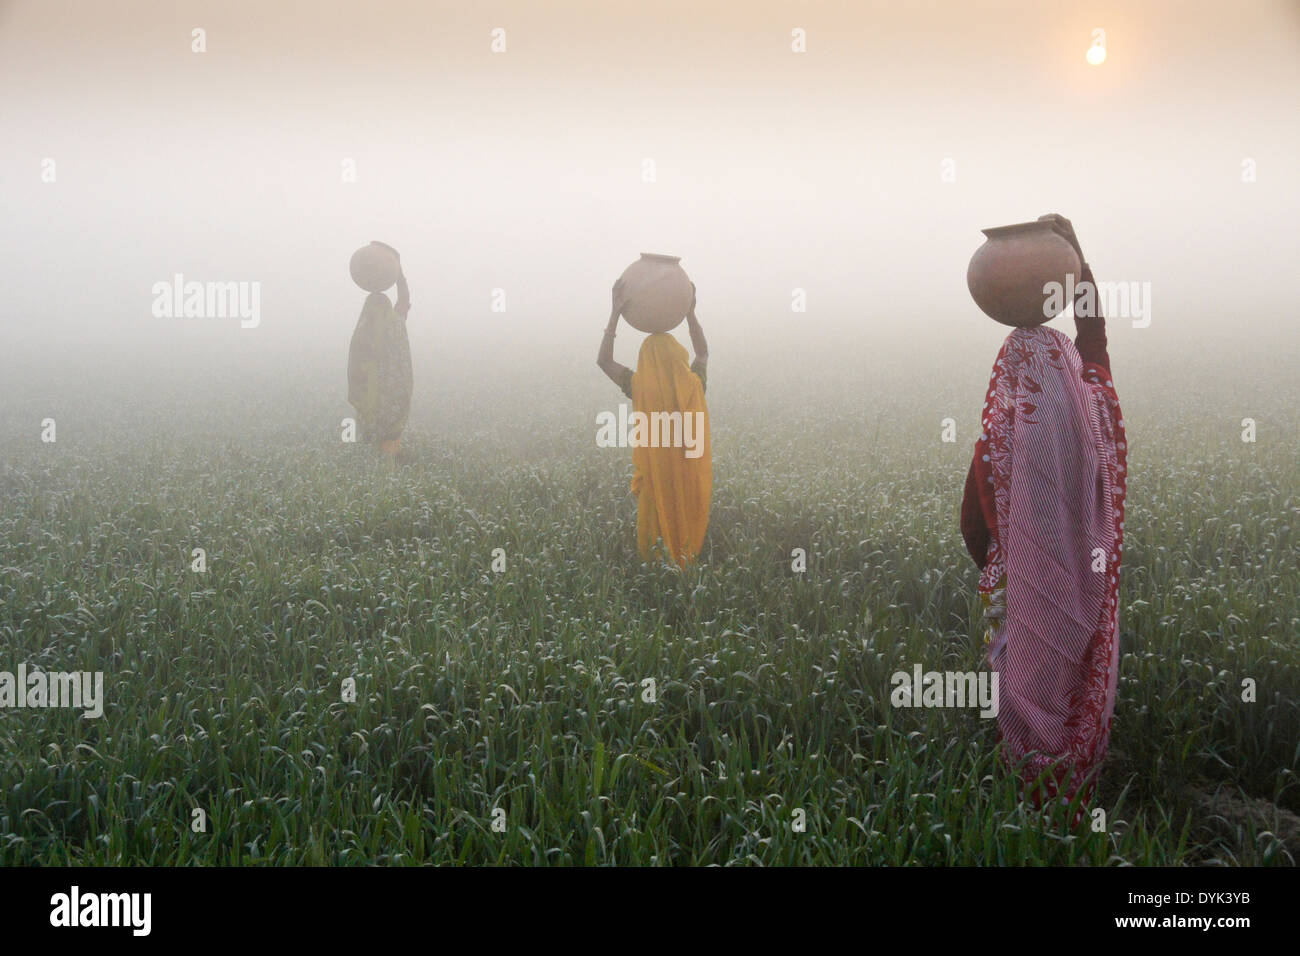 Women with water jugs on head, walking through rice field at sunrise on a foggy morning, India Stock Photo